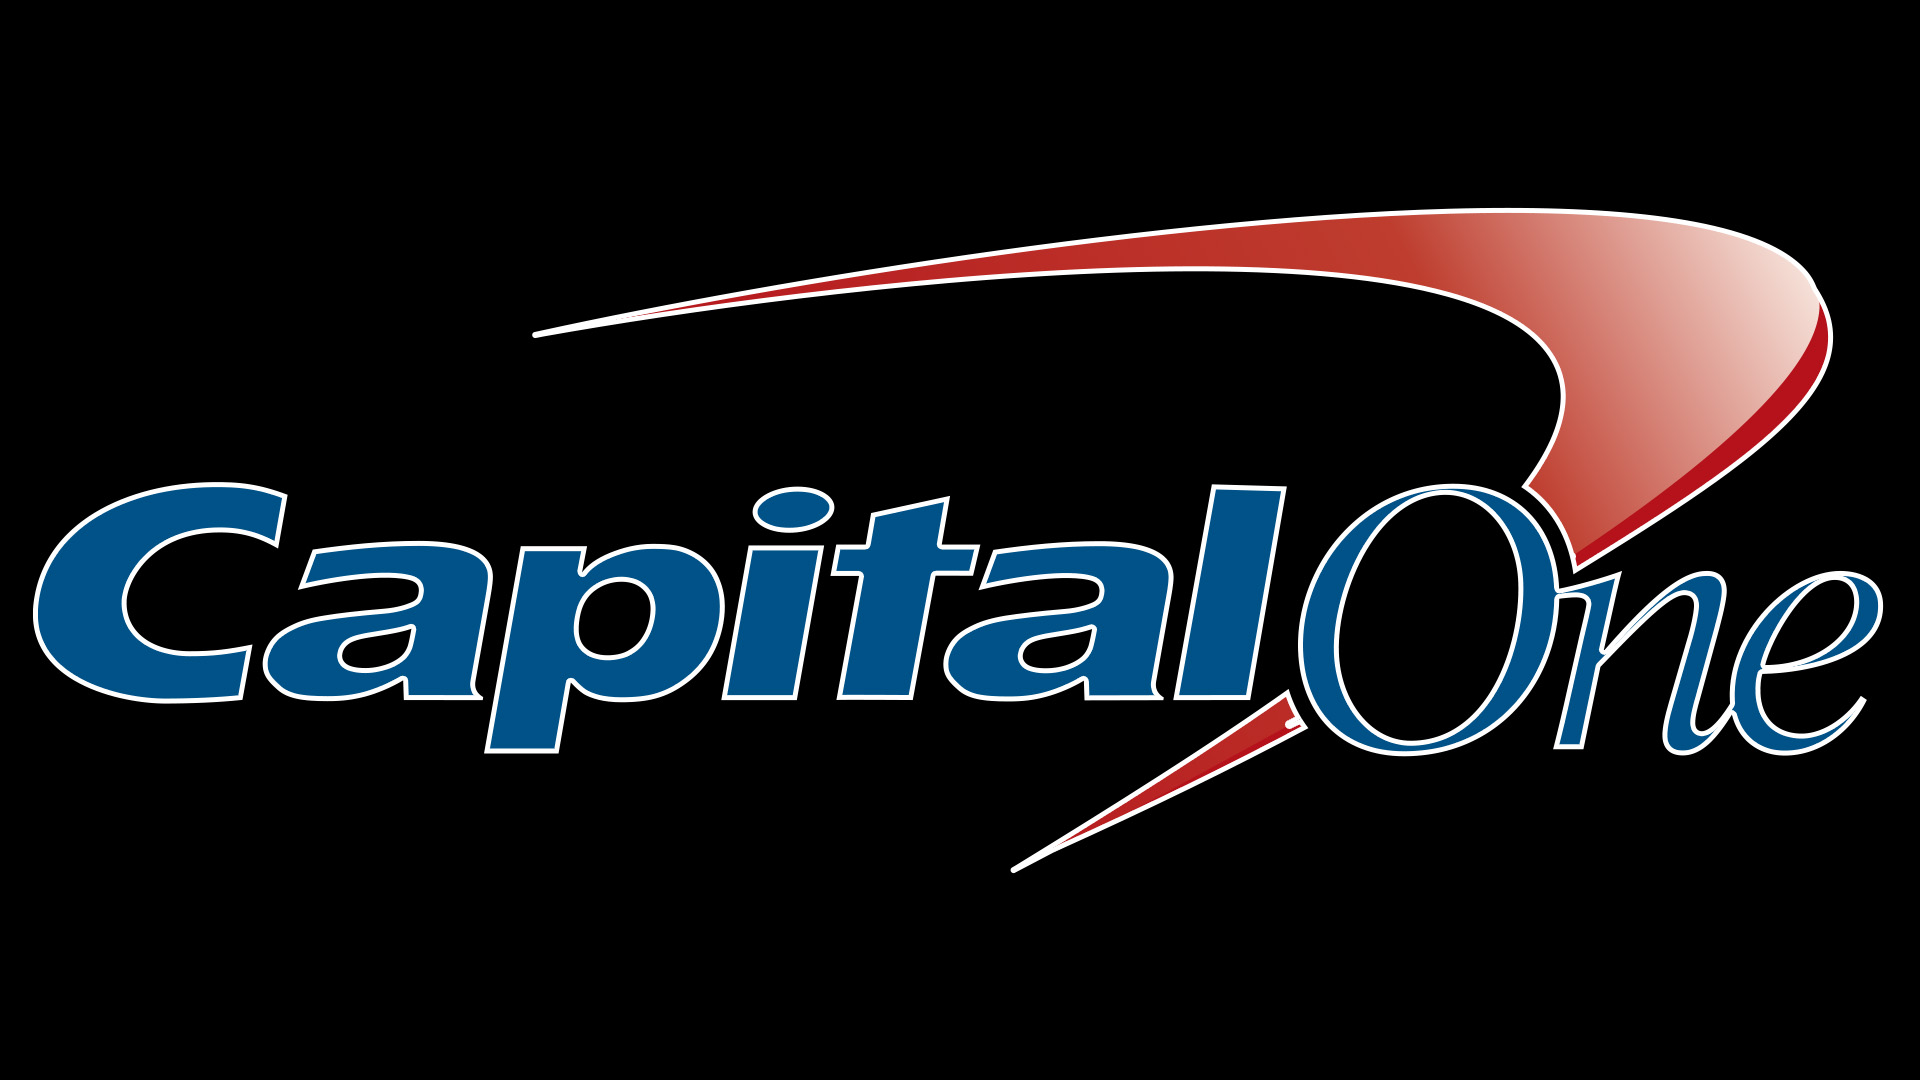 Capital One Data Breach Affects 106 Million People